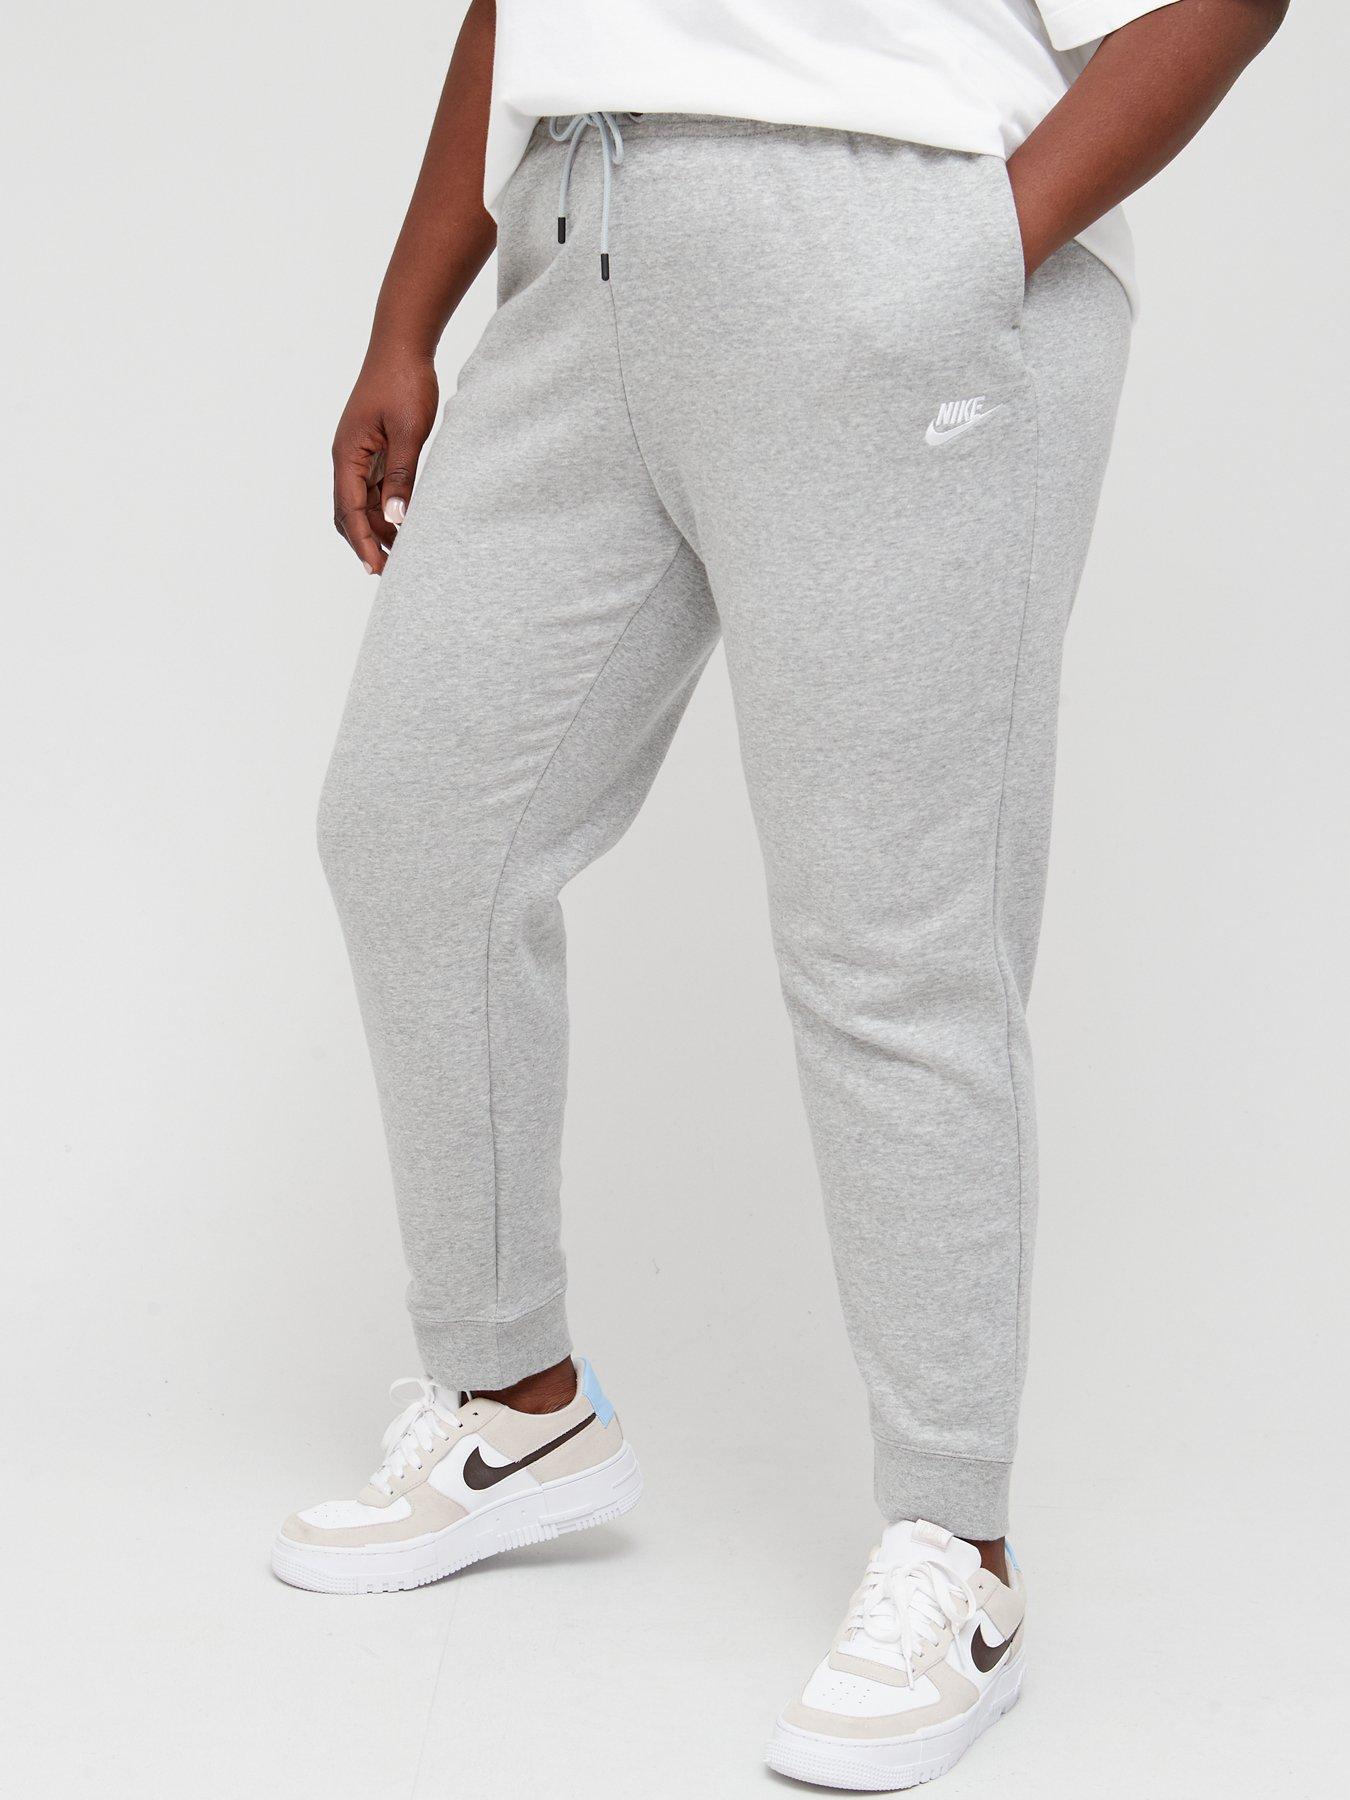 grey womens tracksuit bottoms